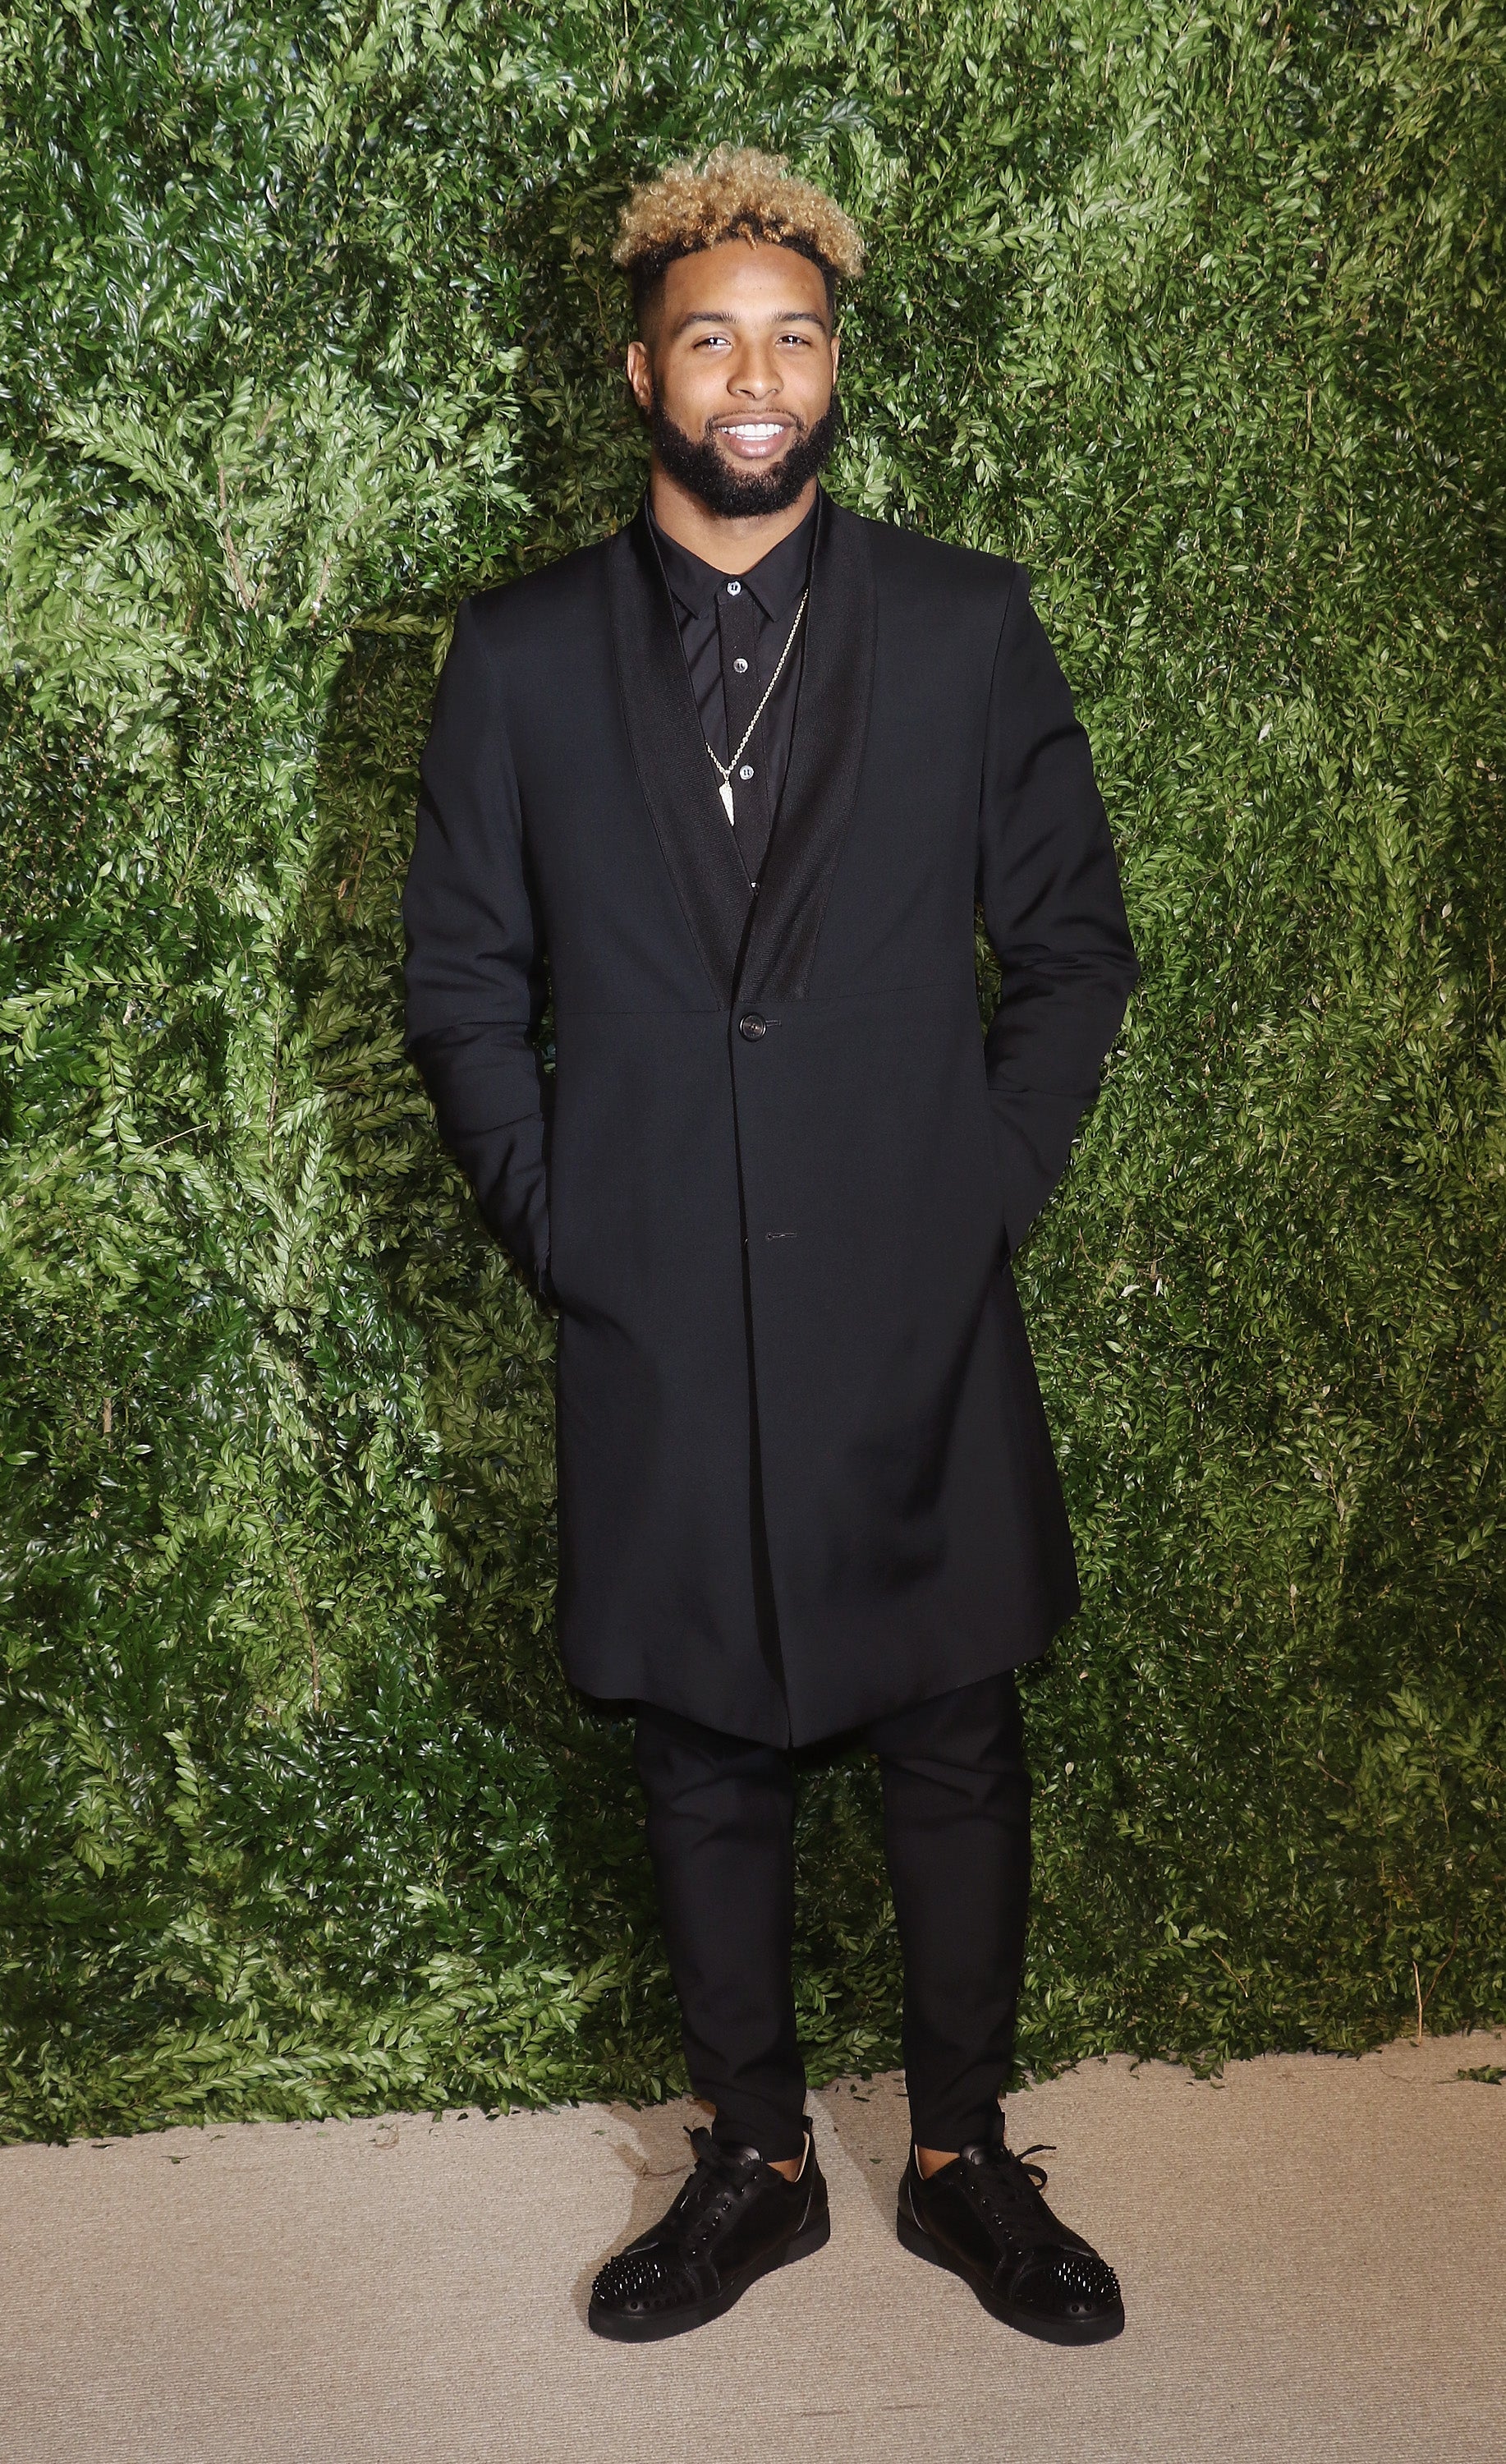 Best Dressed From The 12th Annual CFDA/Vogue Fashion Fund Awards